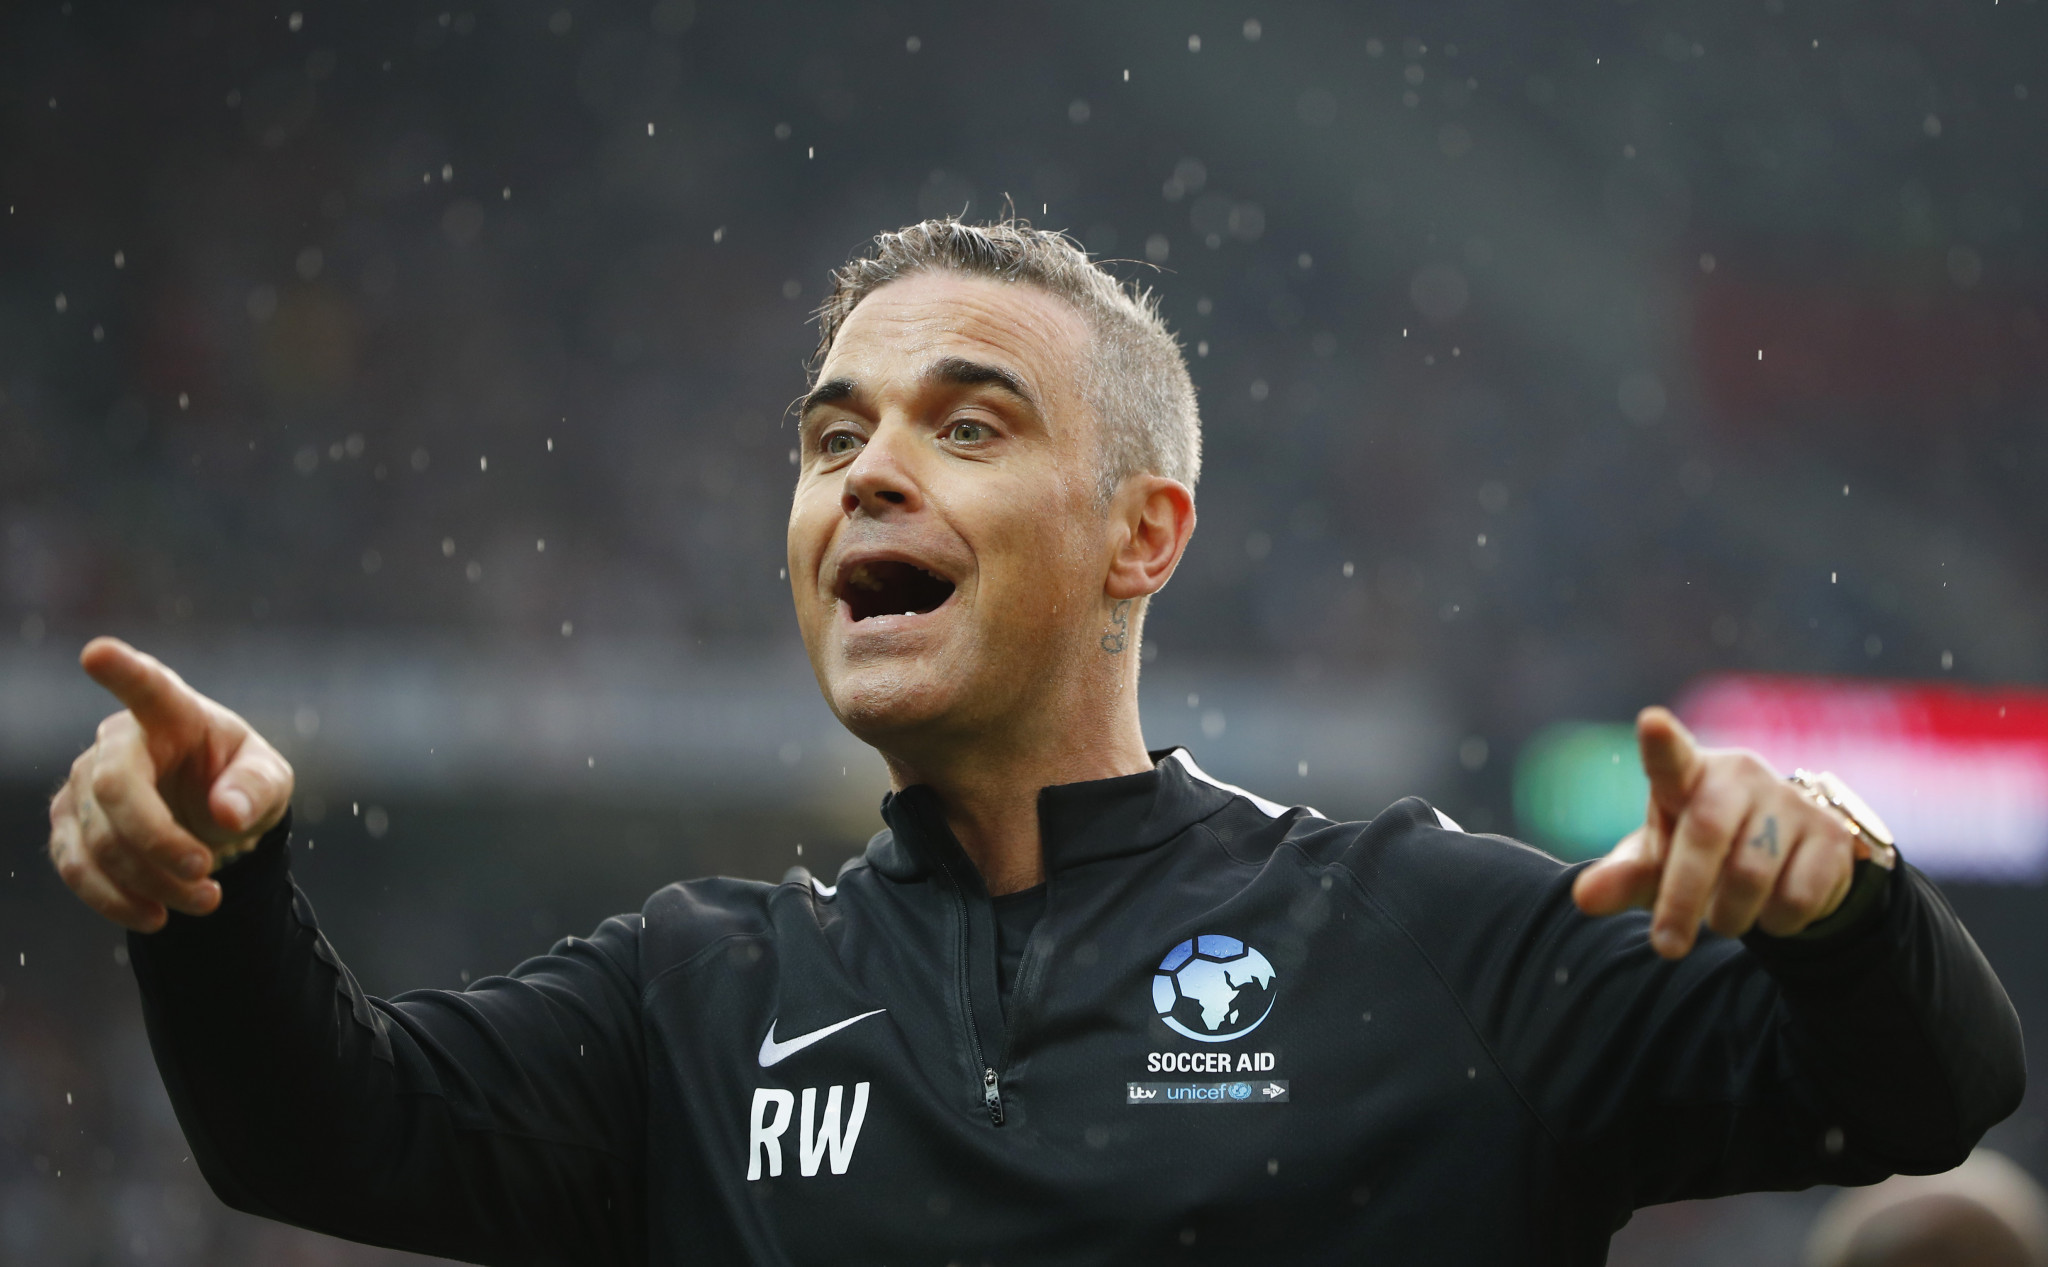 Robbie Williams criticised after announced as Opening Ceremony performer for FIFA World Cup